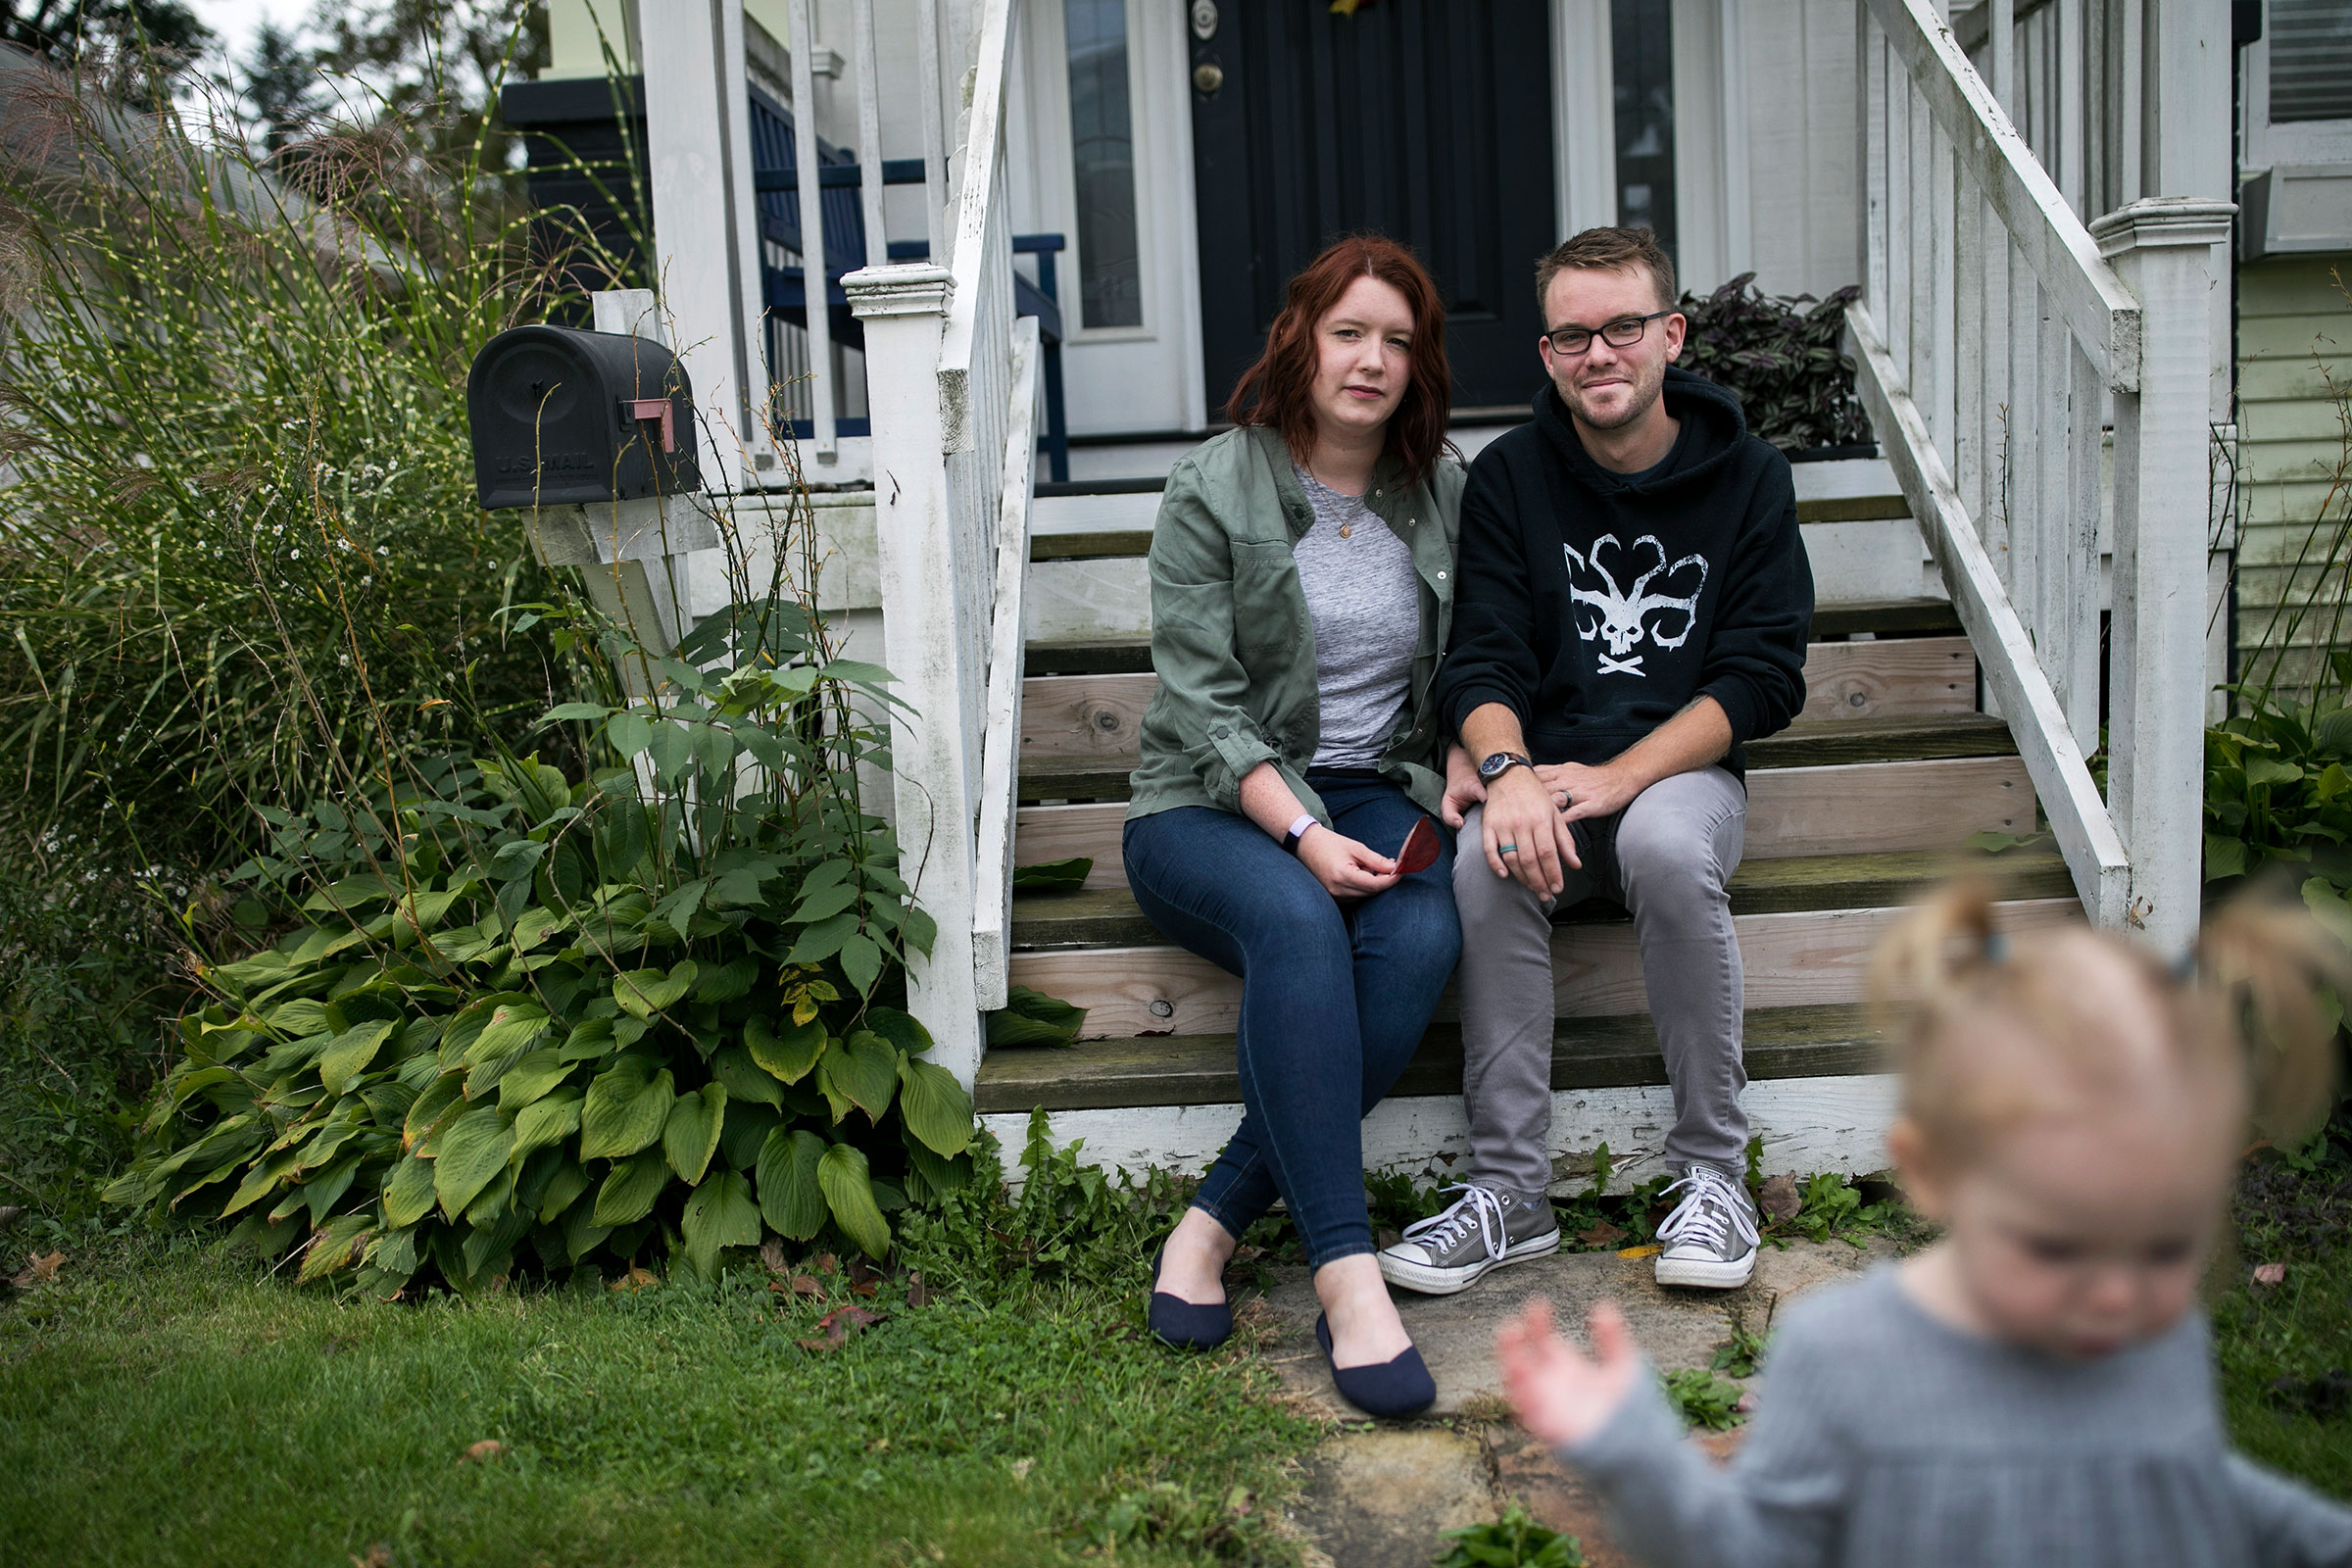 Shelby Parker sits outside of her home with her husband Ben and daughter Abby in Cuyahoga Falls, Ohio on Oct. 3. Parker planned to get pregnant this year but is contemplating not trying for a second child at all now due to the coronavirus pandemic. (Maddie McGarvey for TIME)